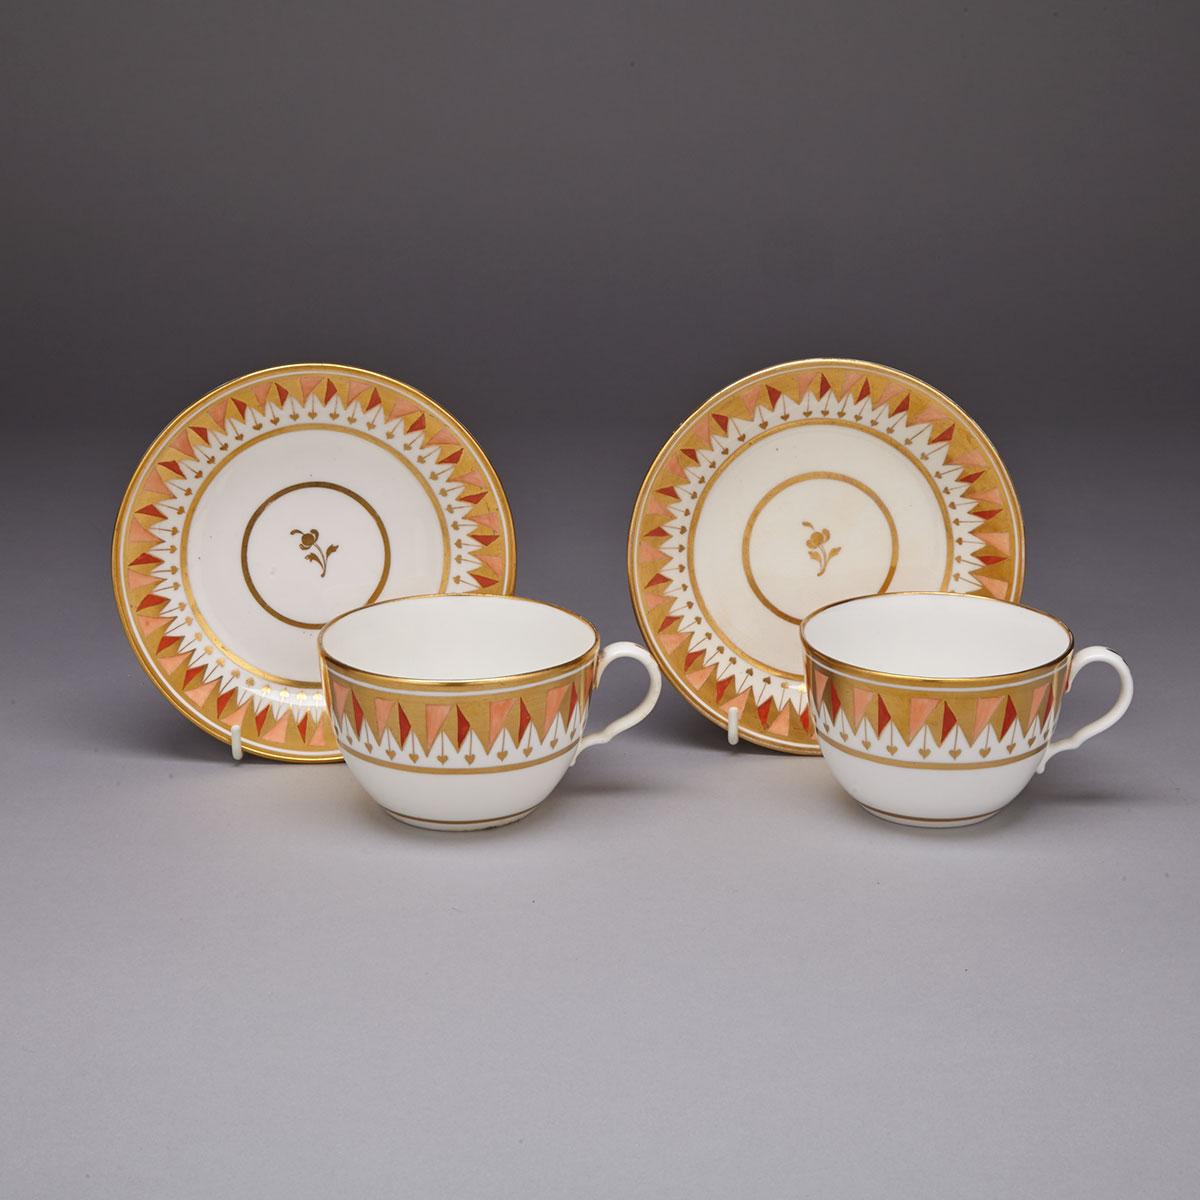 Pair of Copeland & Garrett Orange and Gilt Decorated Breakfast Cups and Saucers, c.1840